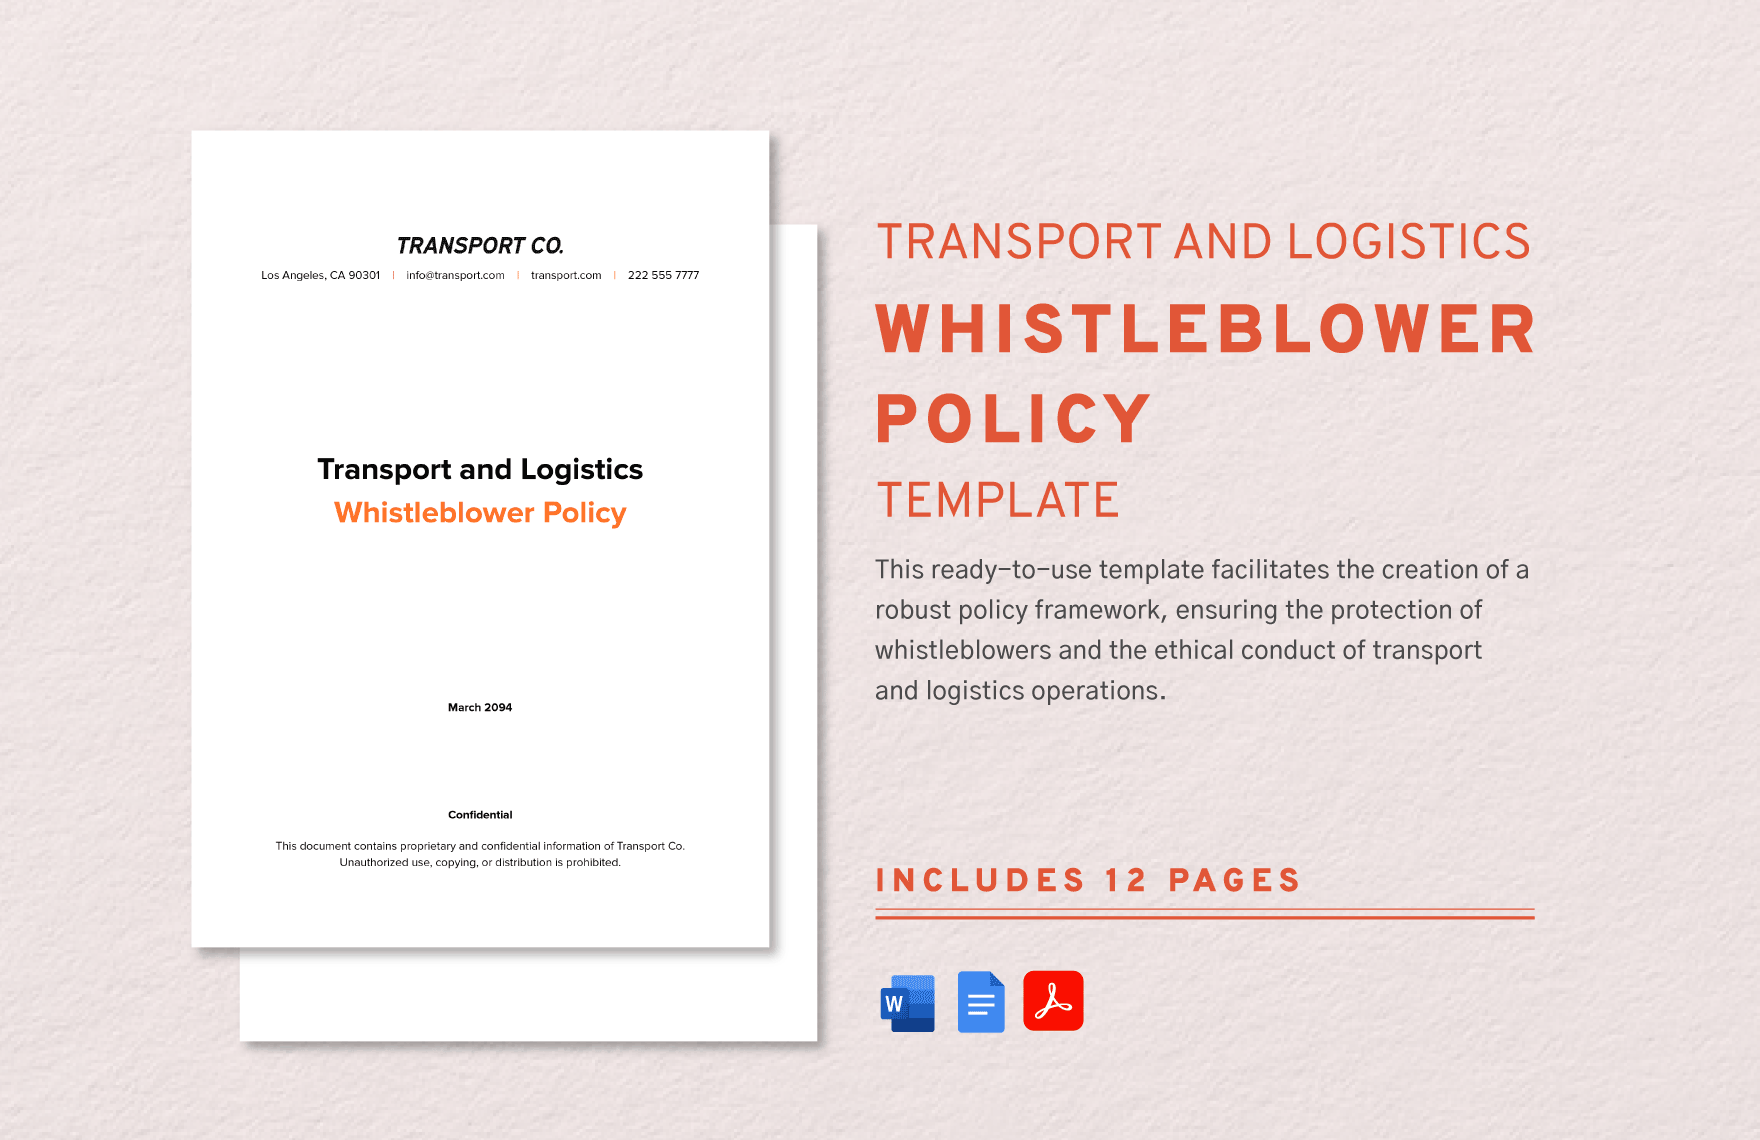 Transport and Logistics Whistleblower Policy Template